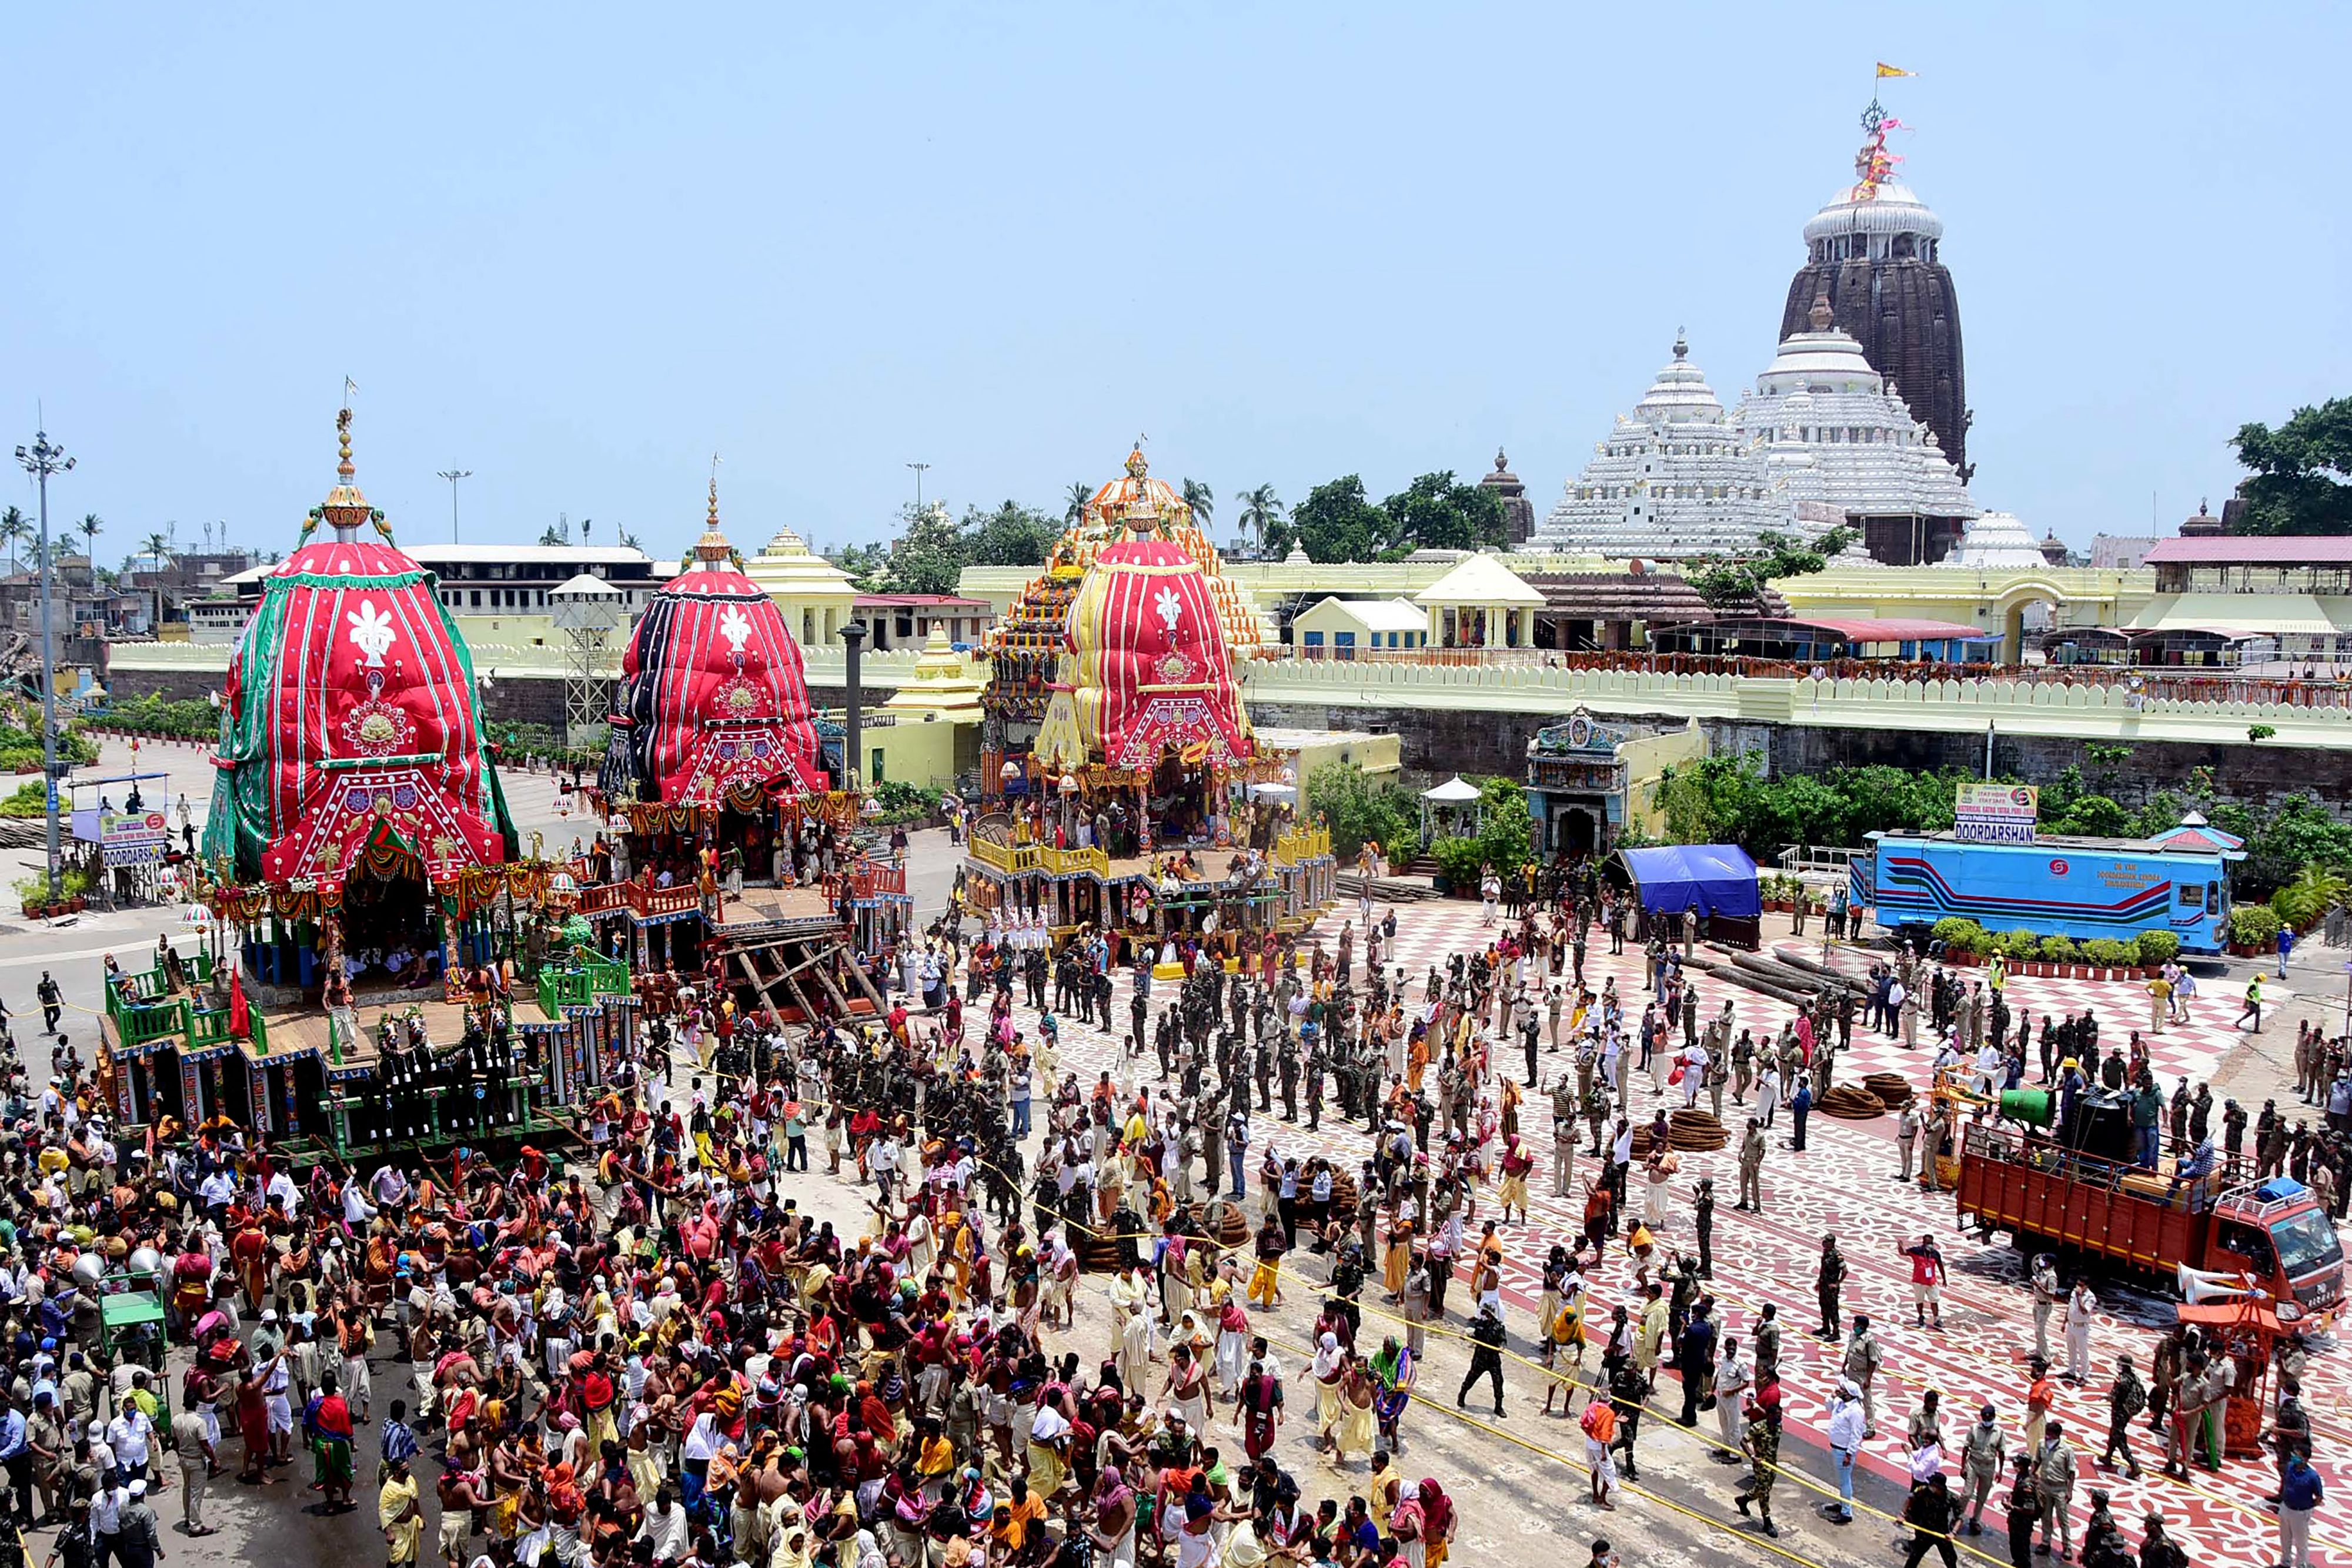 Odisha: Shree Jagannath temple in Puri to reopen from February 1